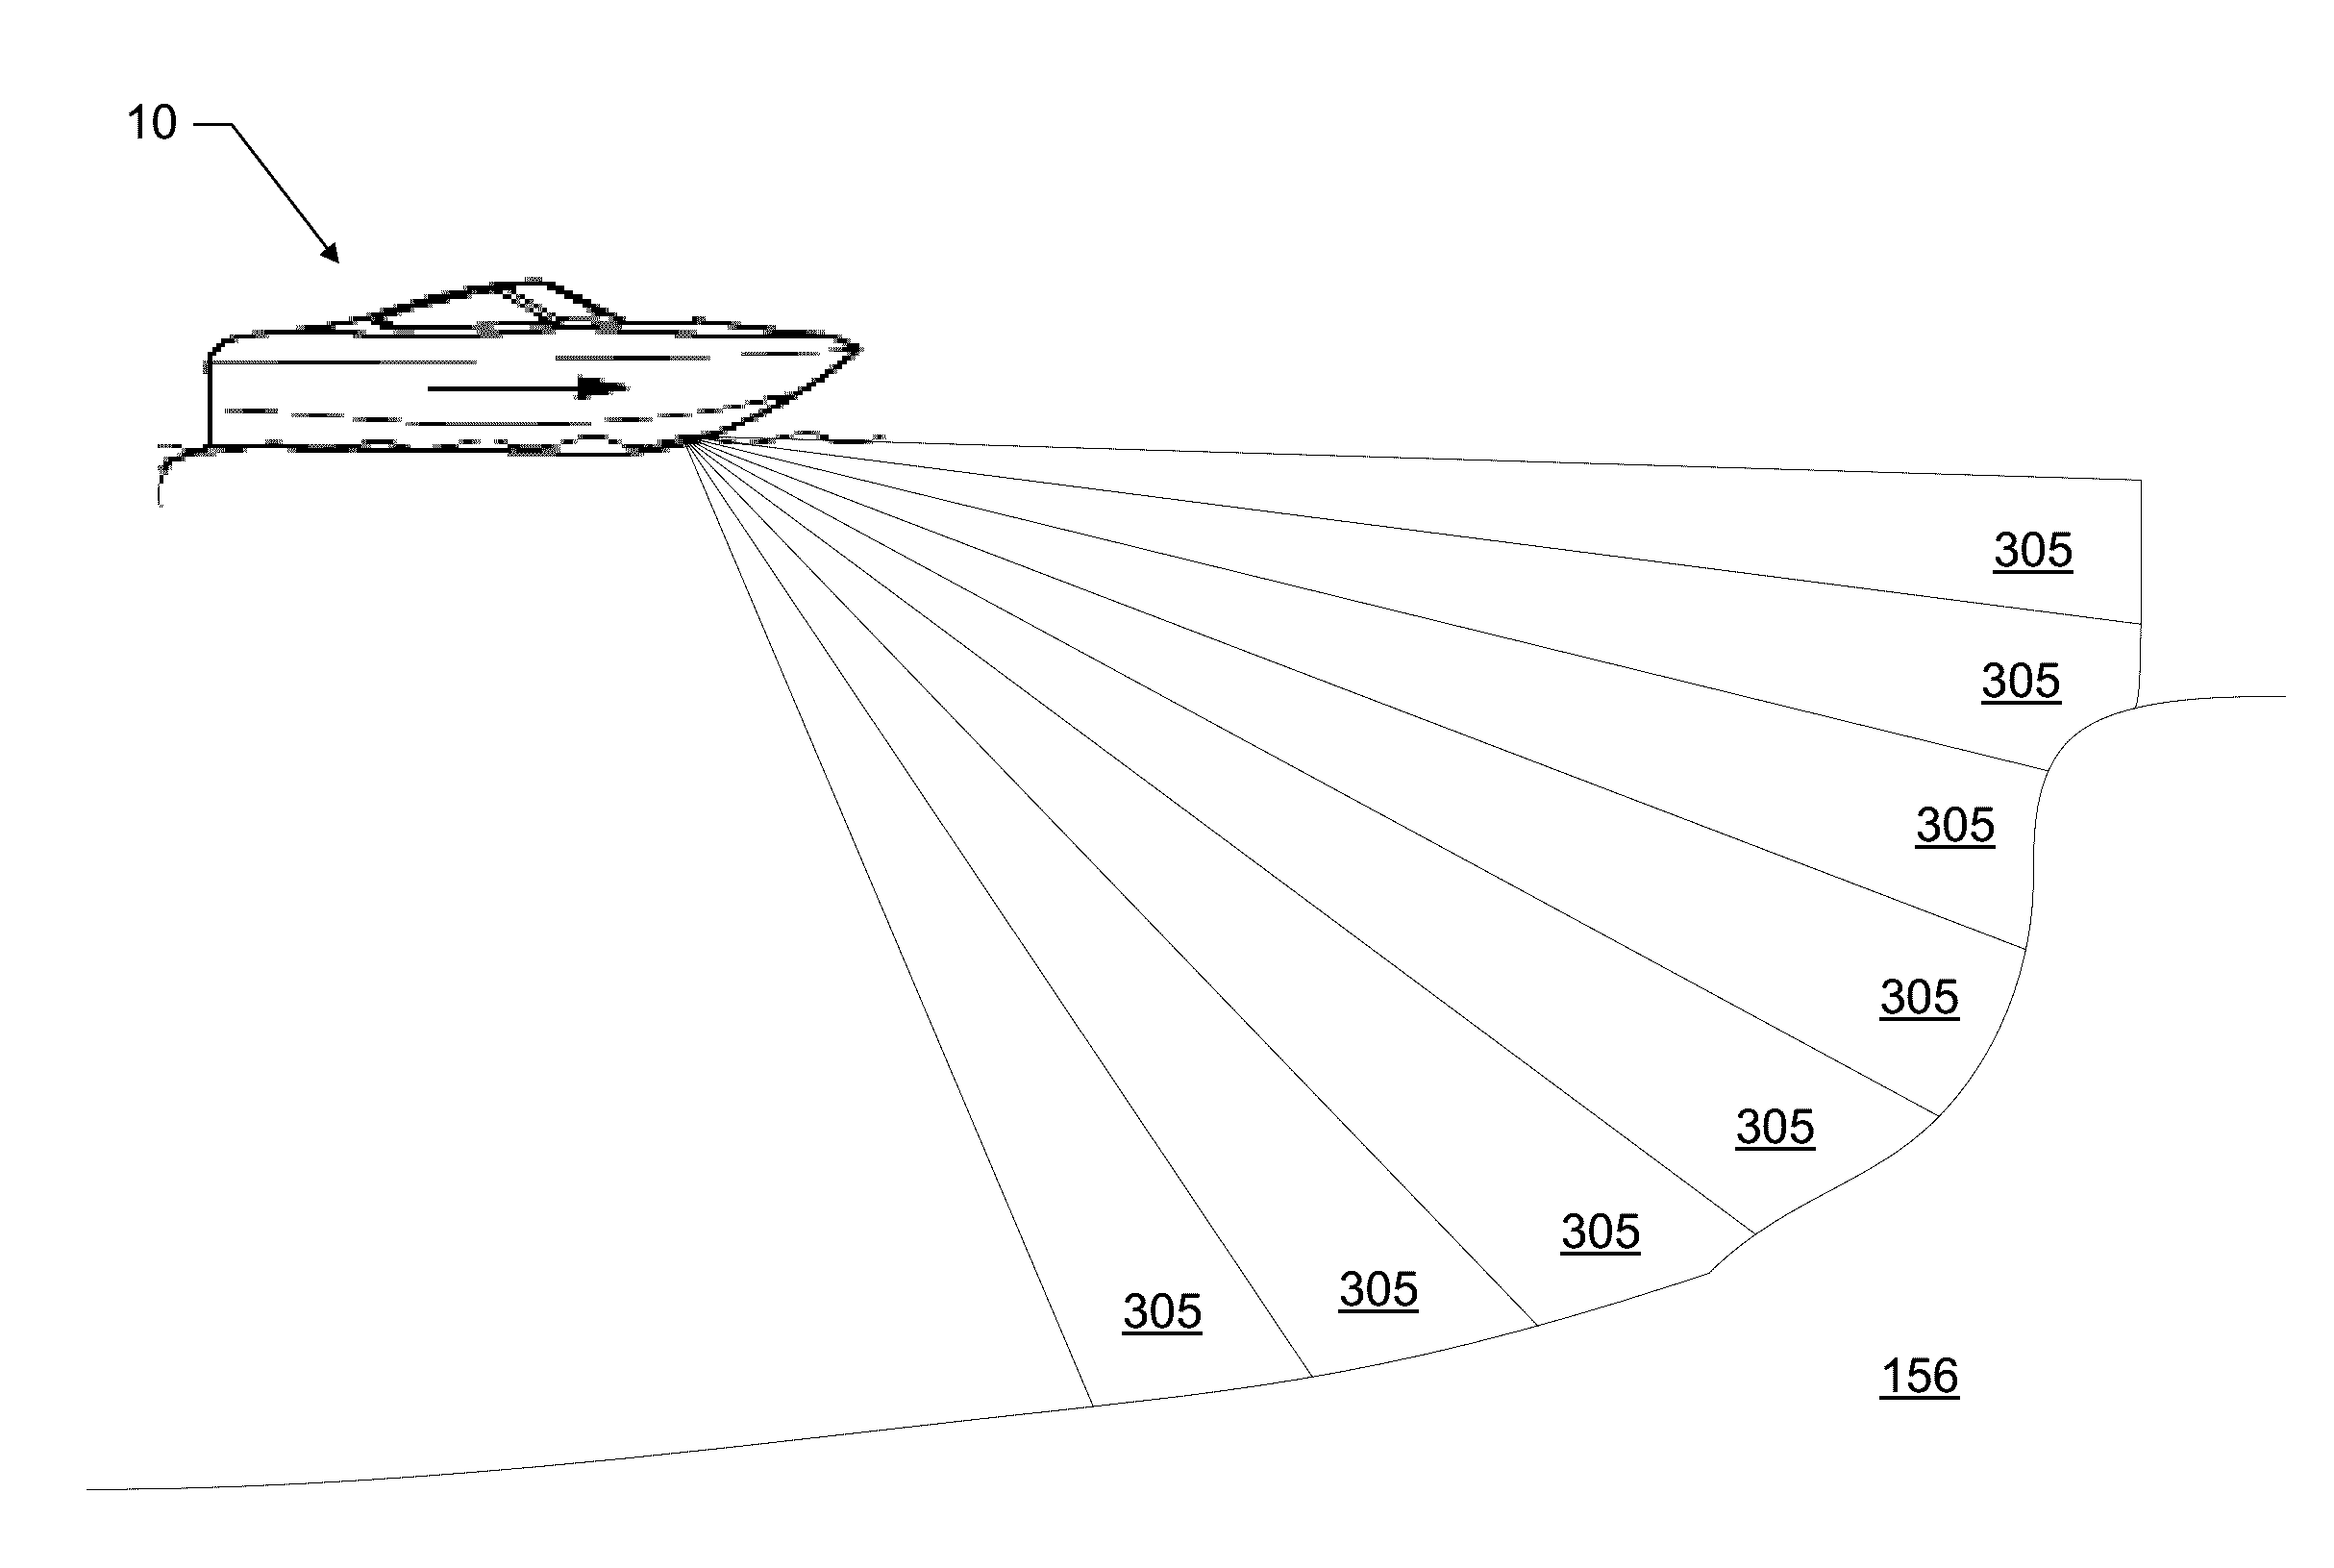 Sonar systems and methods using interferometry and/or beamforming for 3D imaging